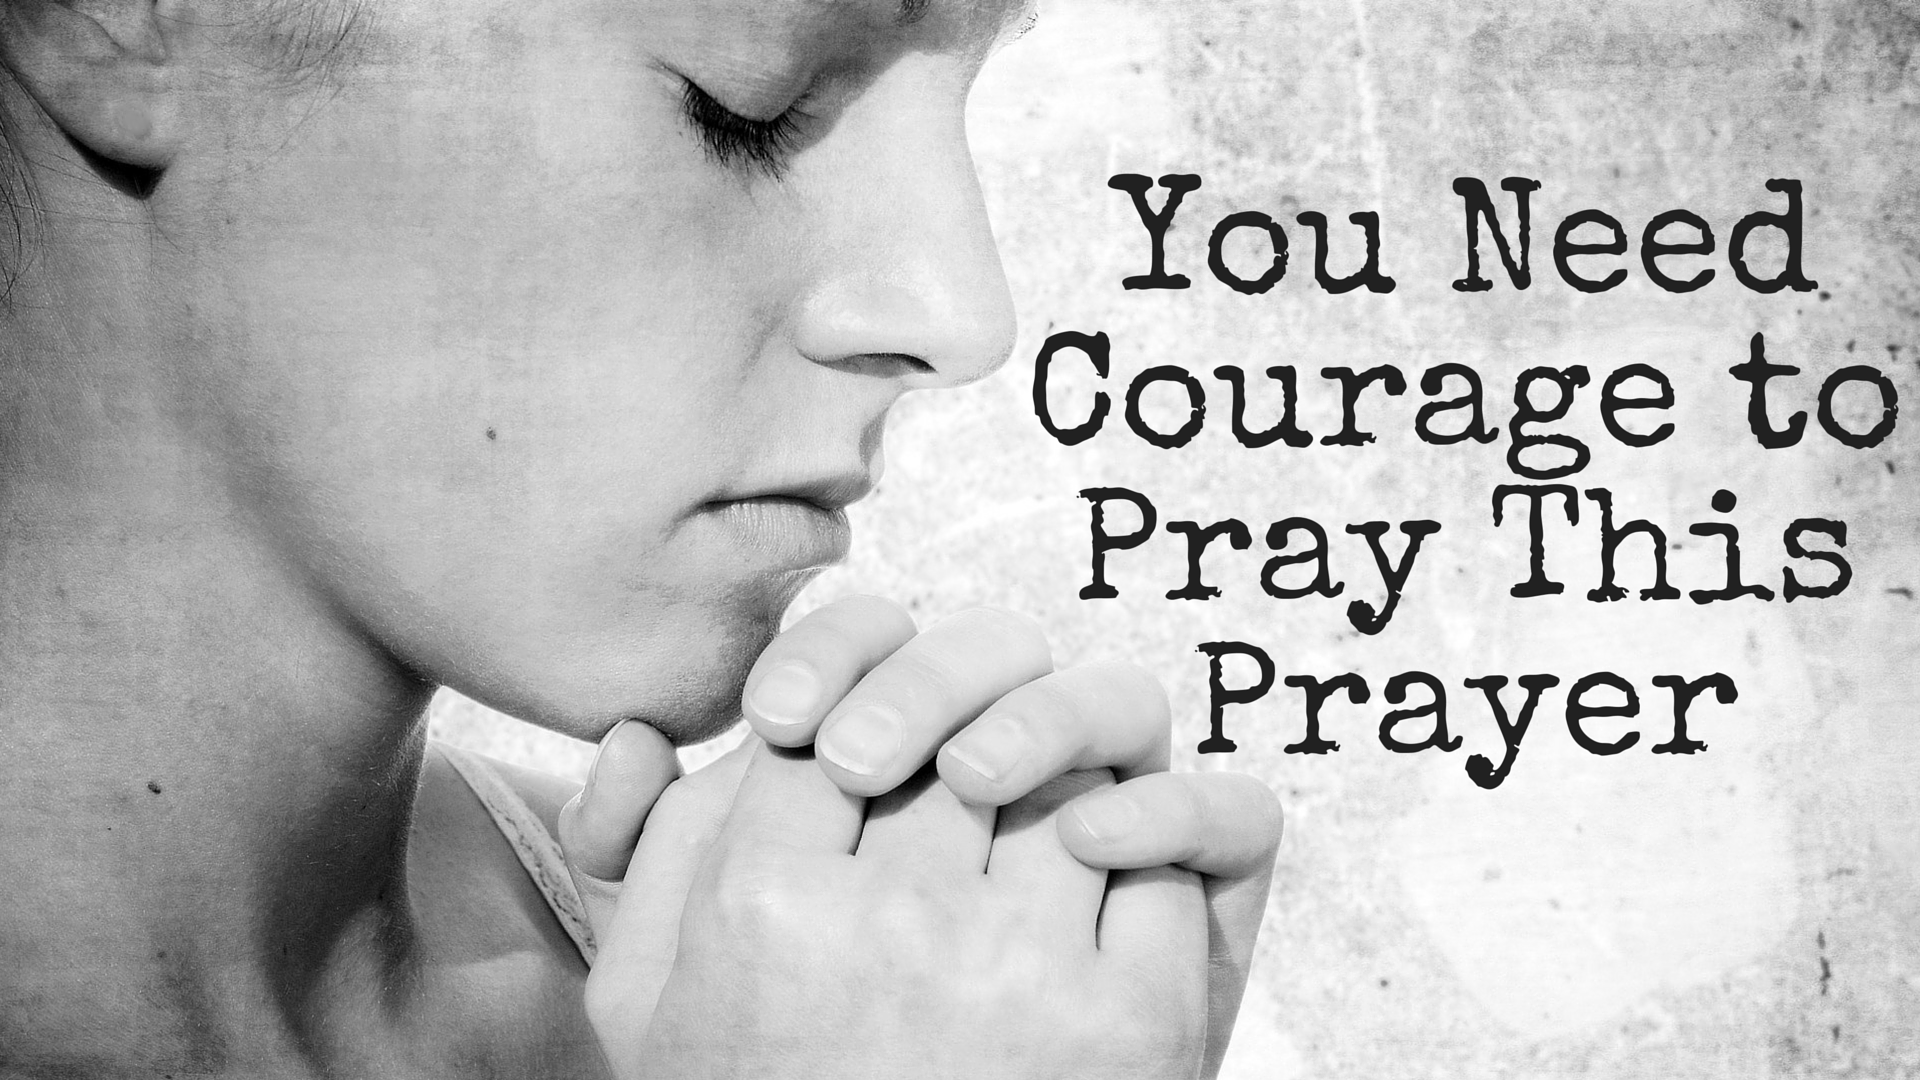 You Need Courage to Pray This Prayer